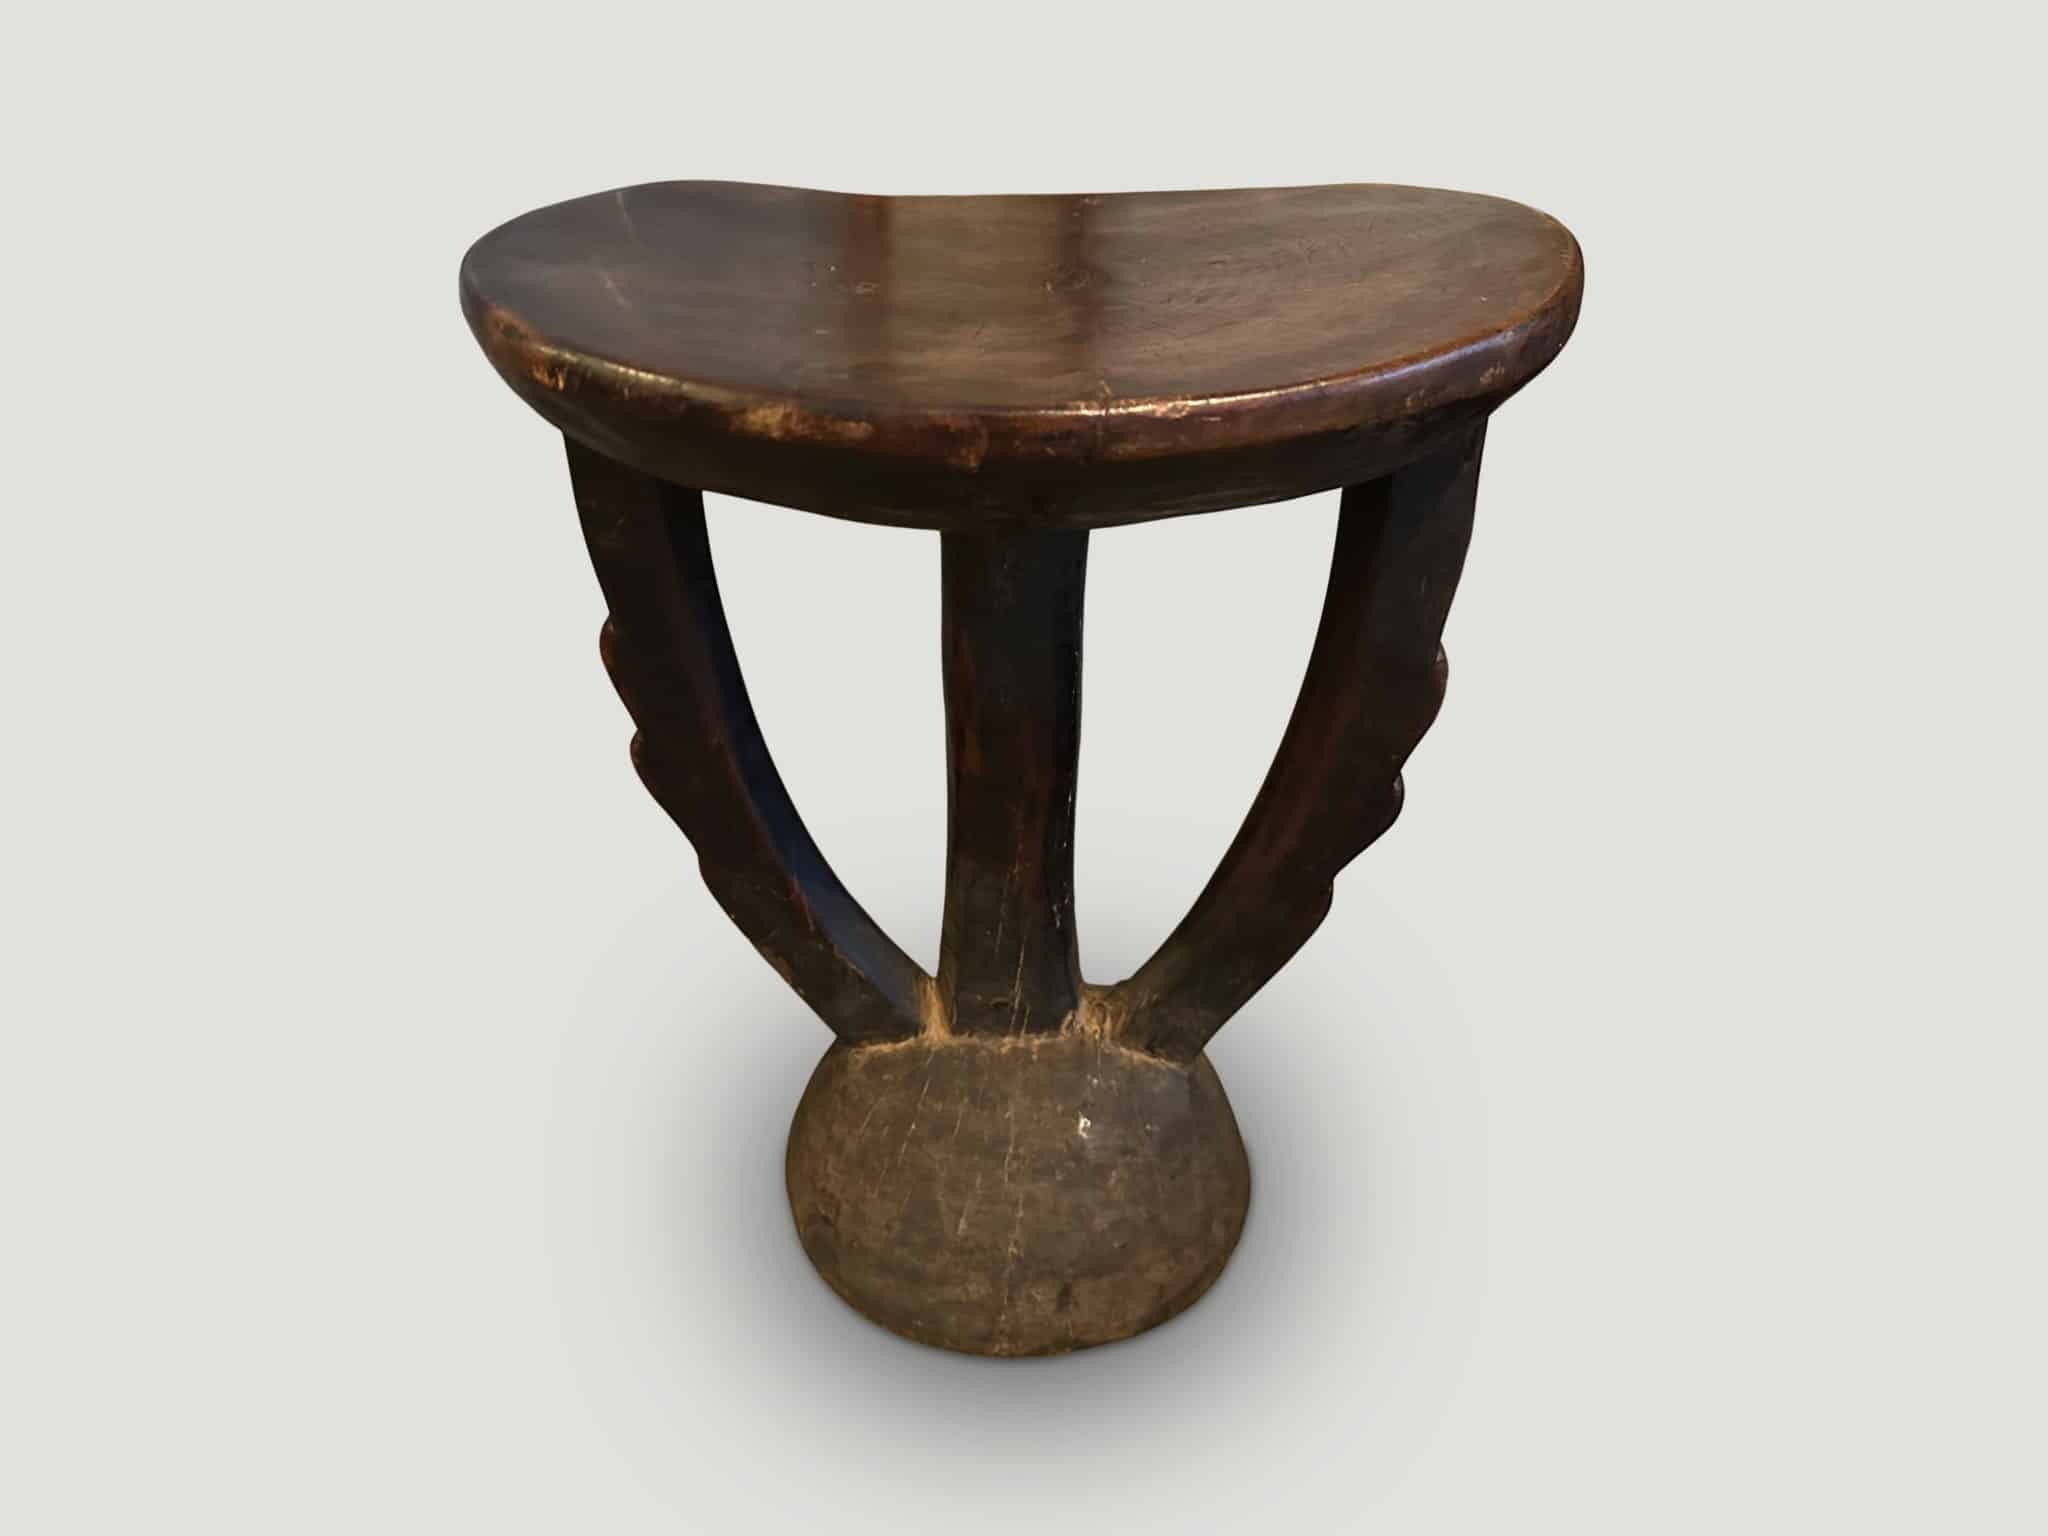 RARE ANTIQUE AFRICAN SCULPTURAL SIDE TABLE